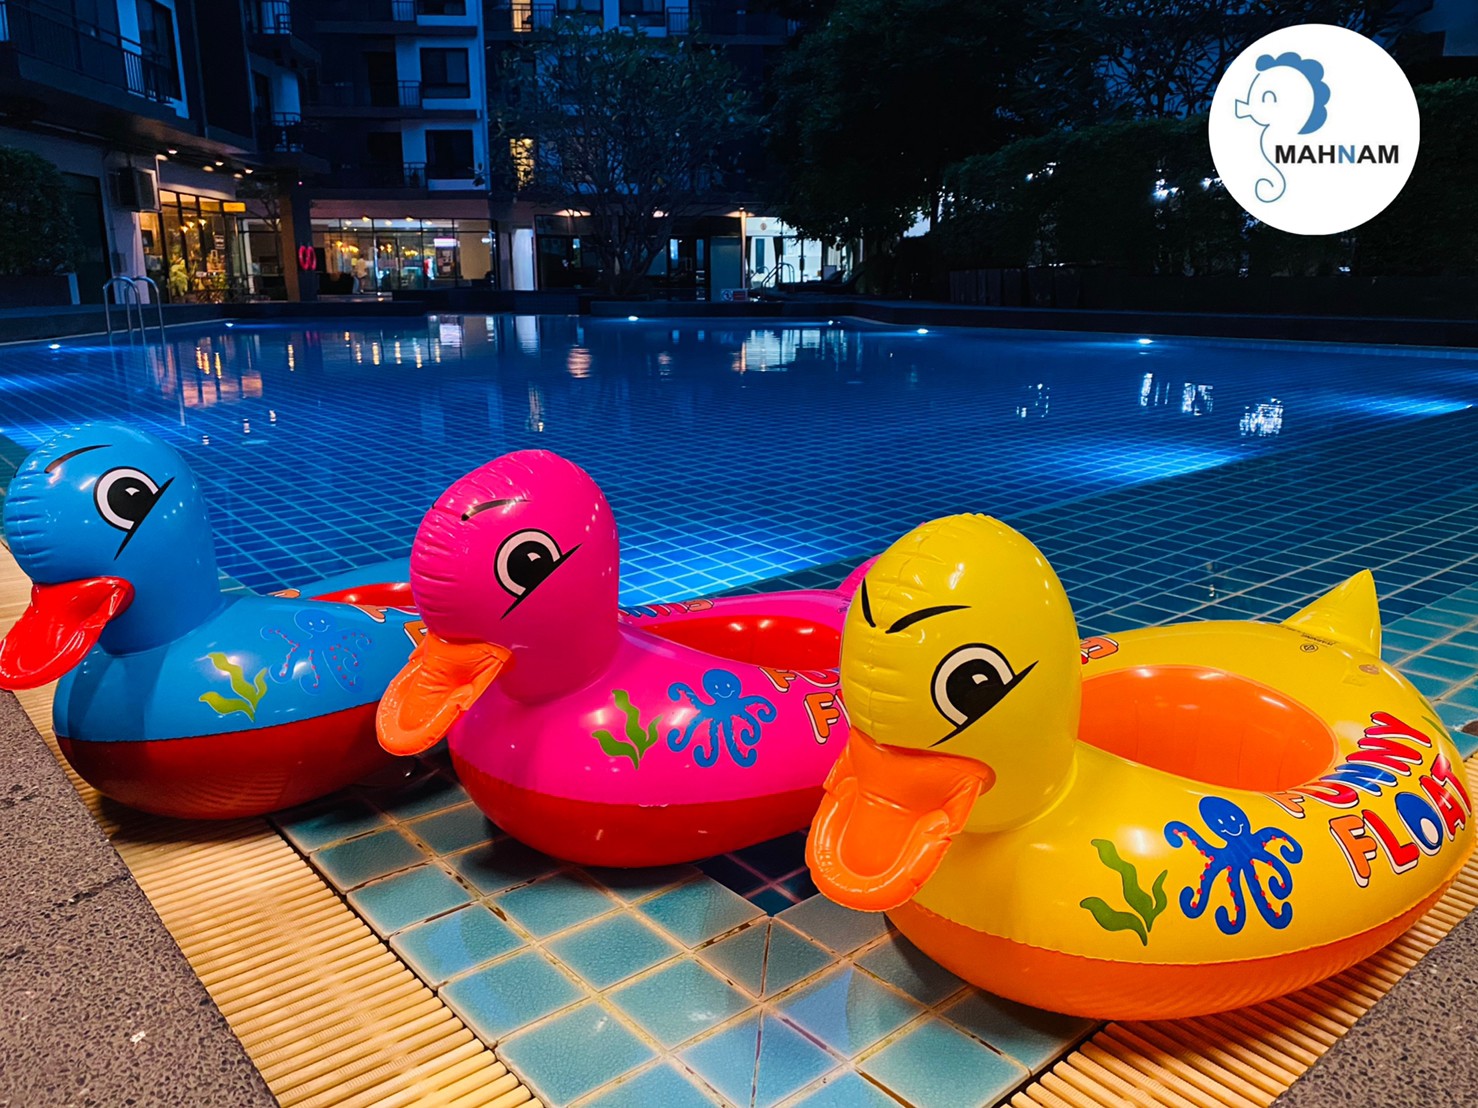 Mahnam    Big and Fun for kids ห่วงยางสอดขารูปเป็ด  Duck float kids inflatable baby toddler swimming swim seat pool animal ring MADE IN THAILAND